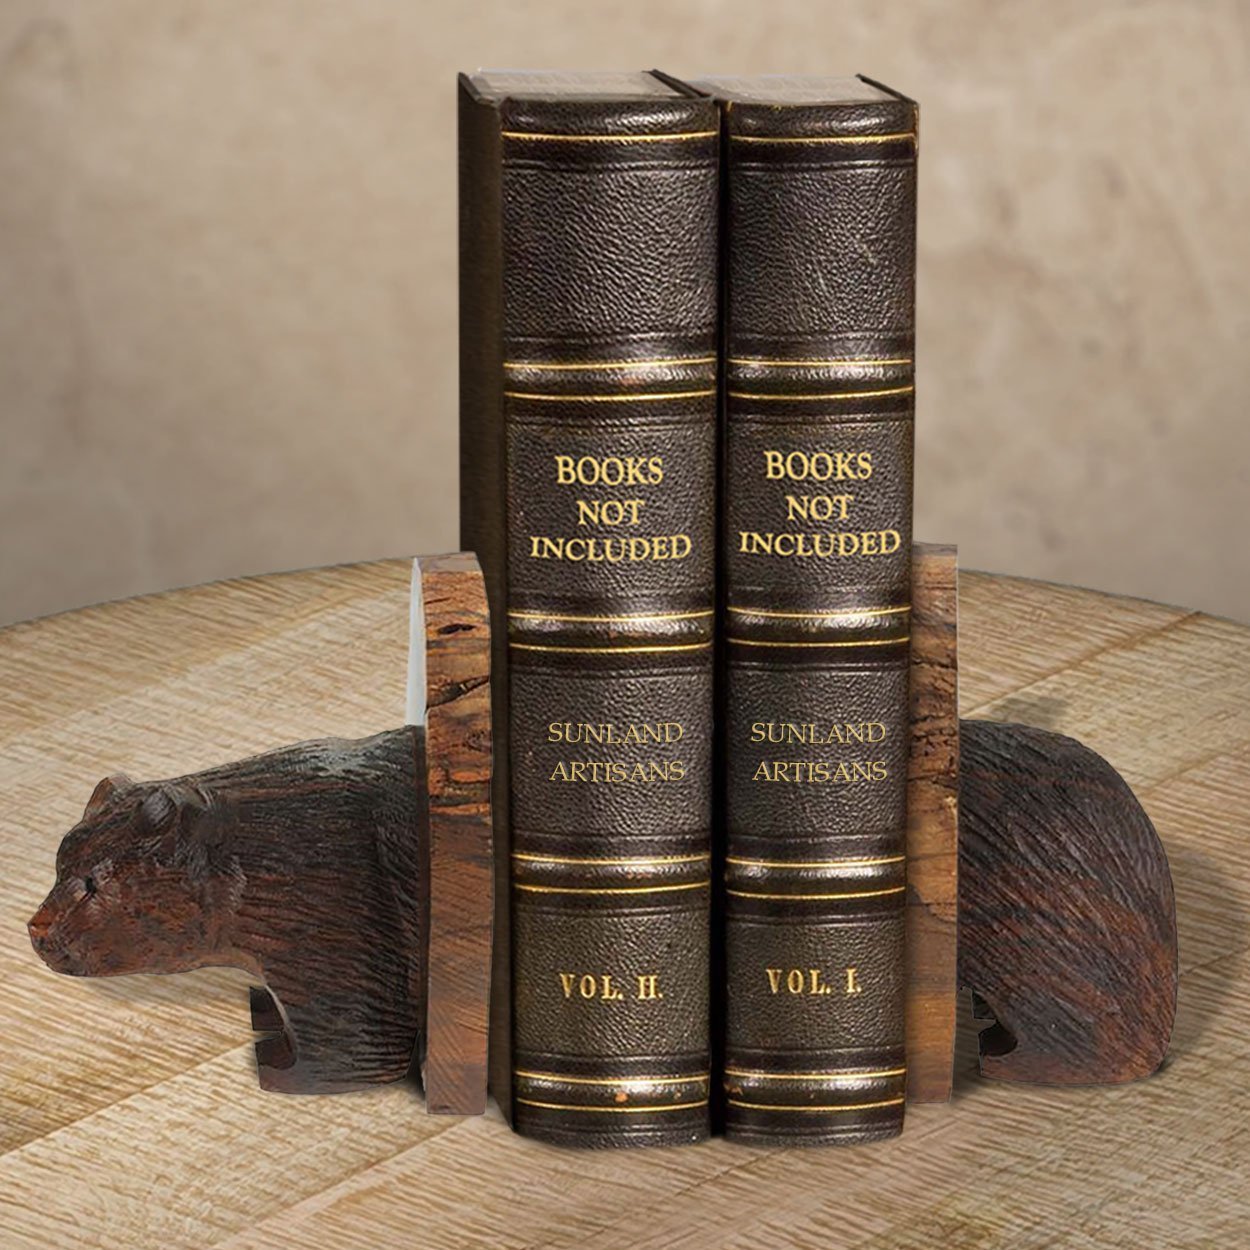 172064 - Bear Body Small Ironwood Set of Two Bookends